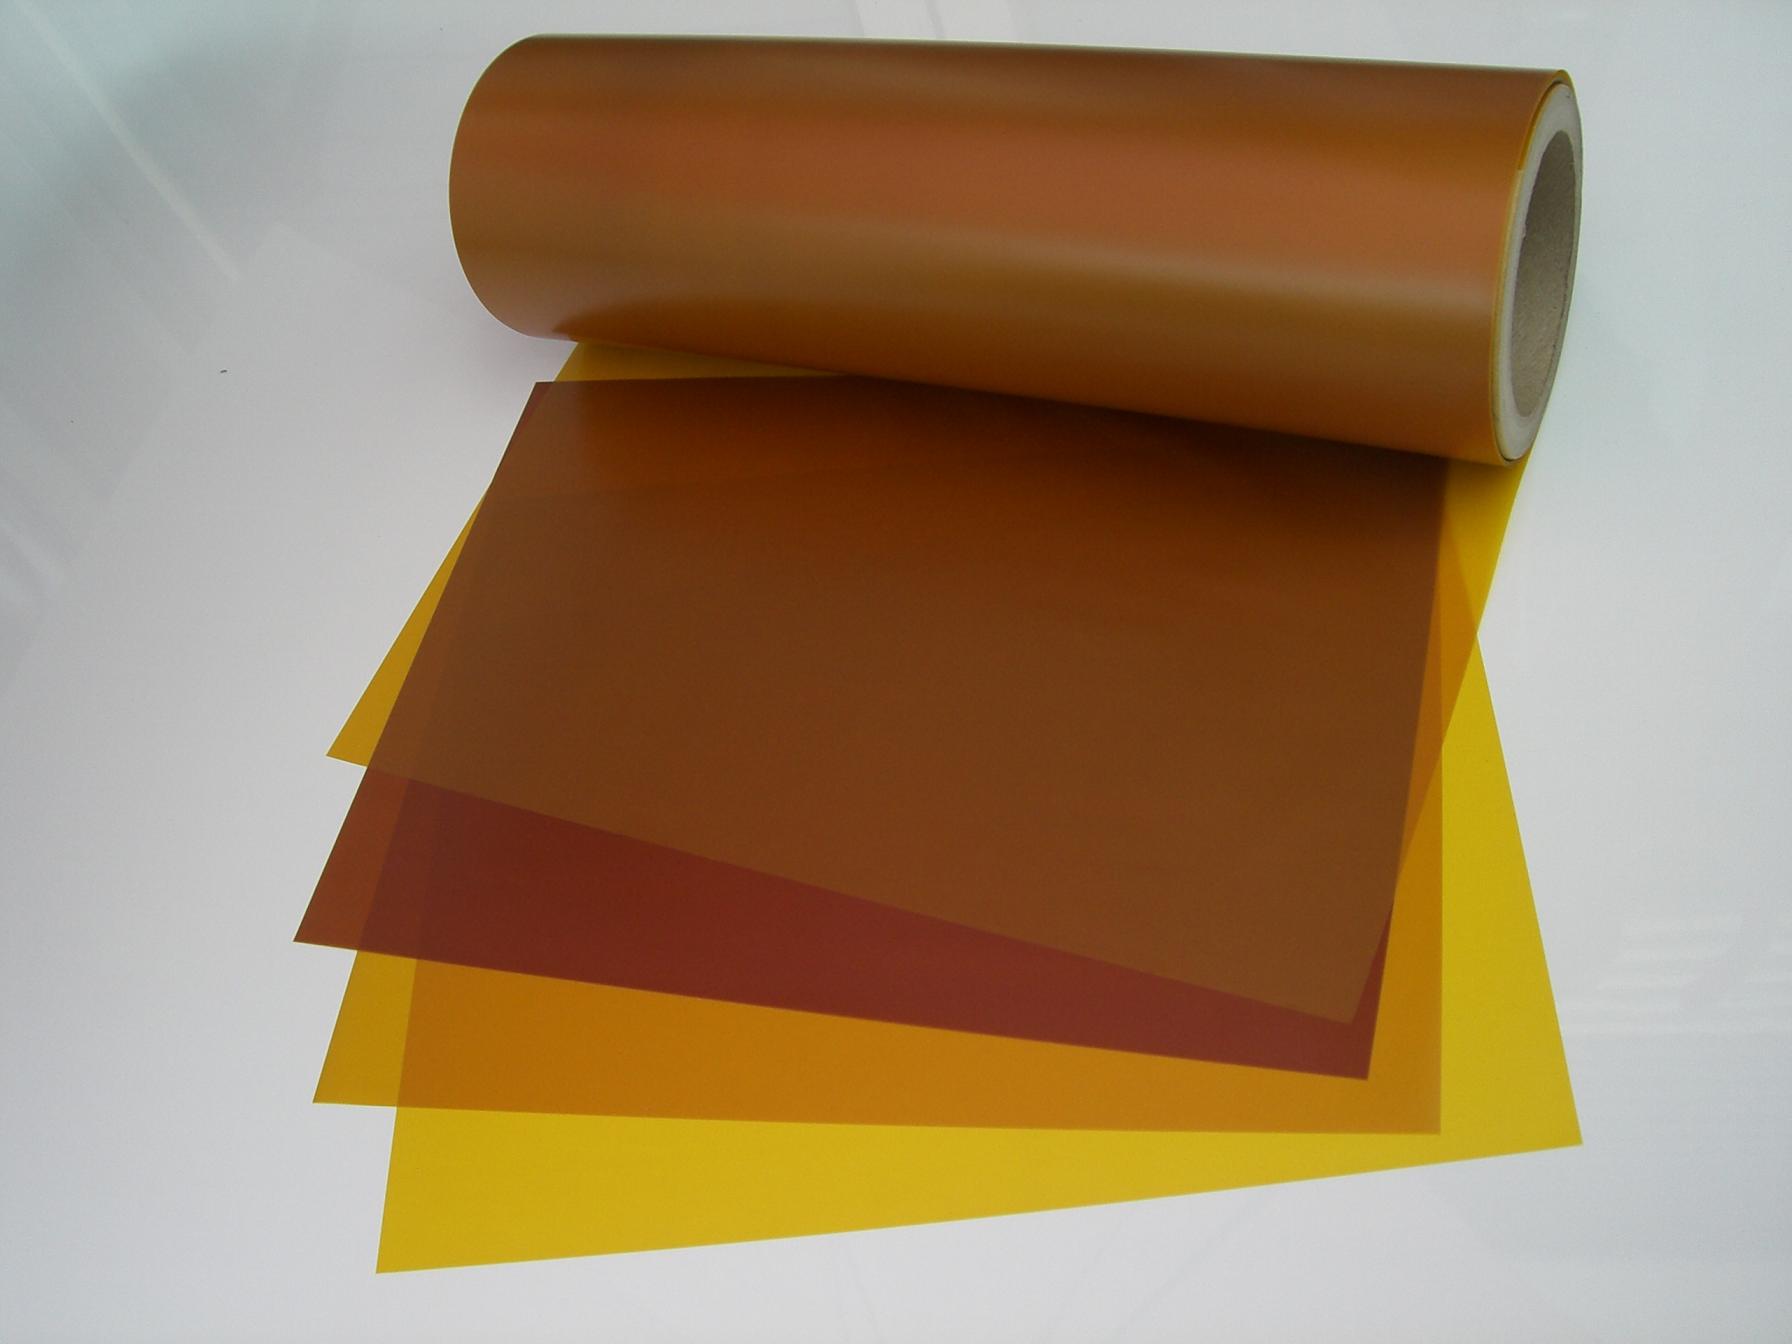 3 Mil (.003" thick) General-Purpose Polyimide Film HN 180°C, amber, custom rolls and sheets based on your specification